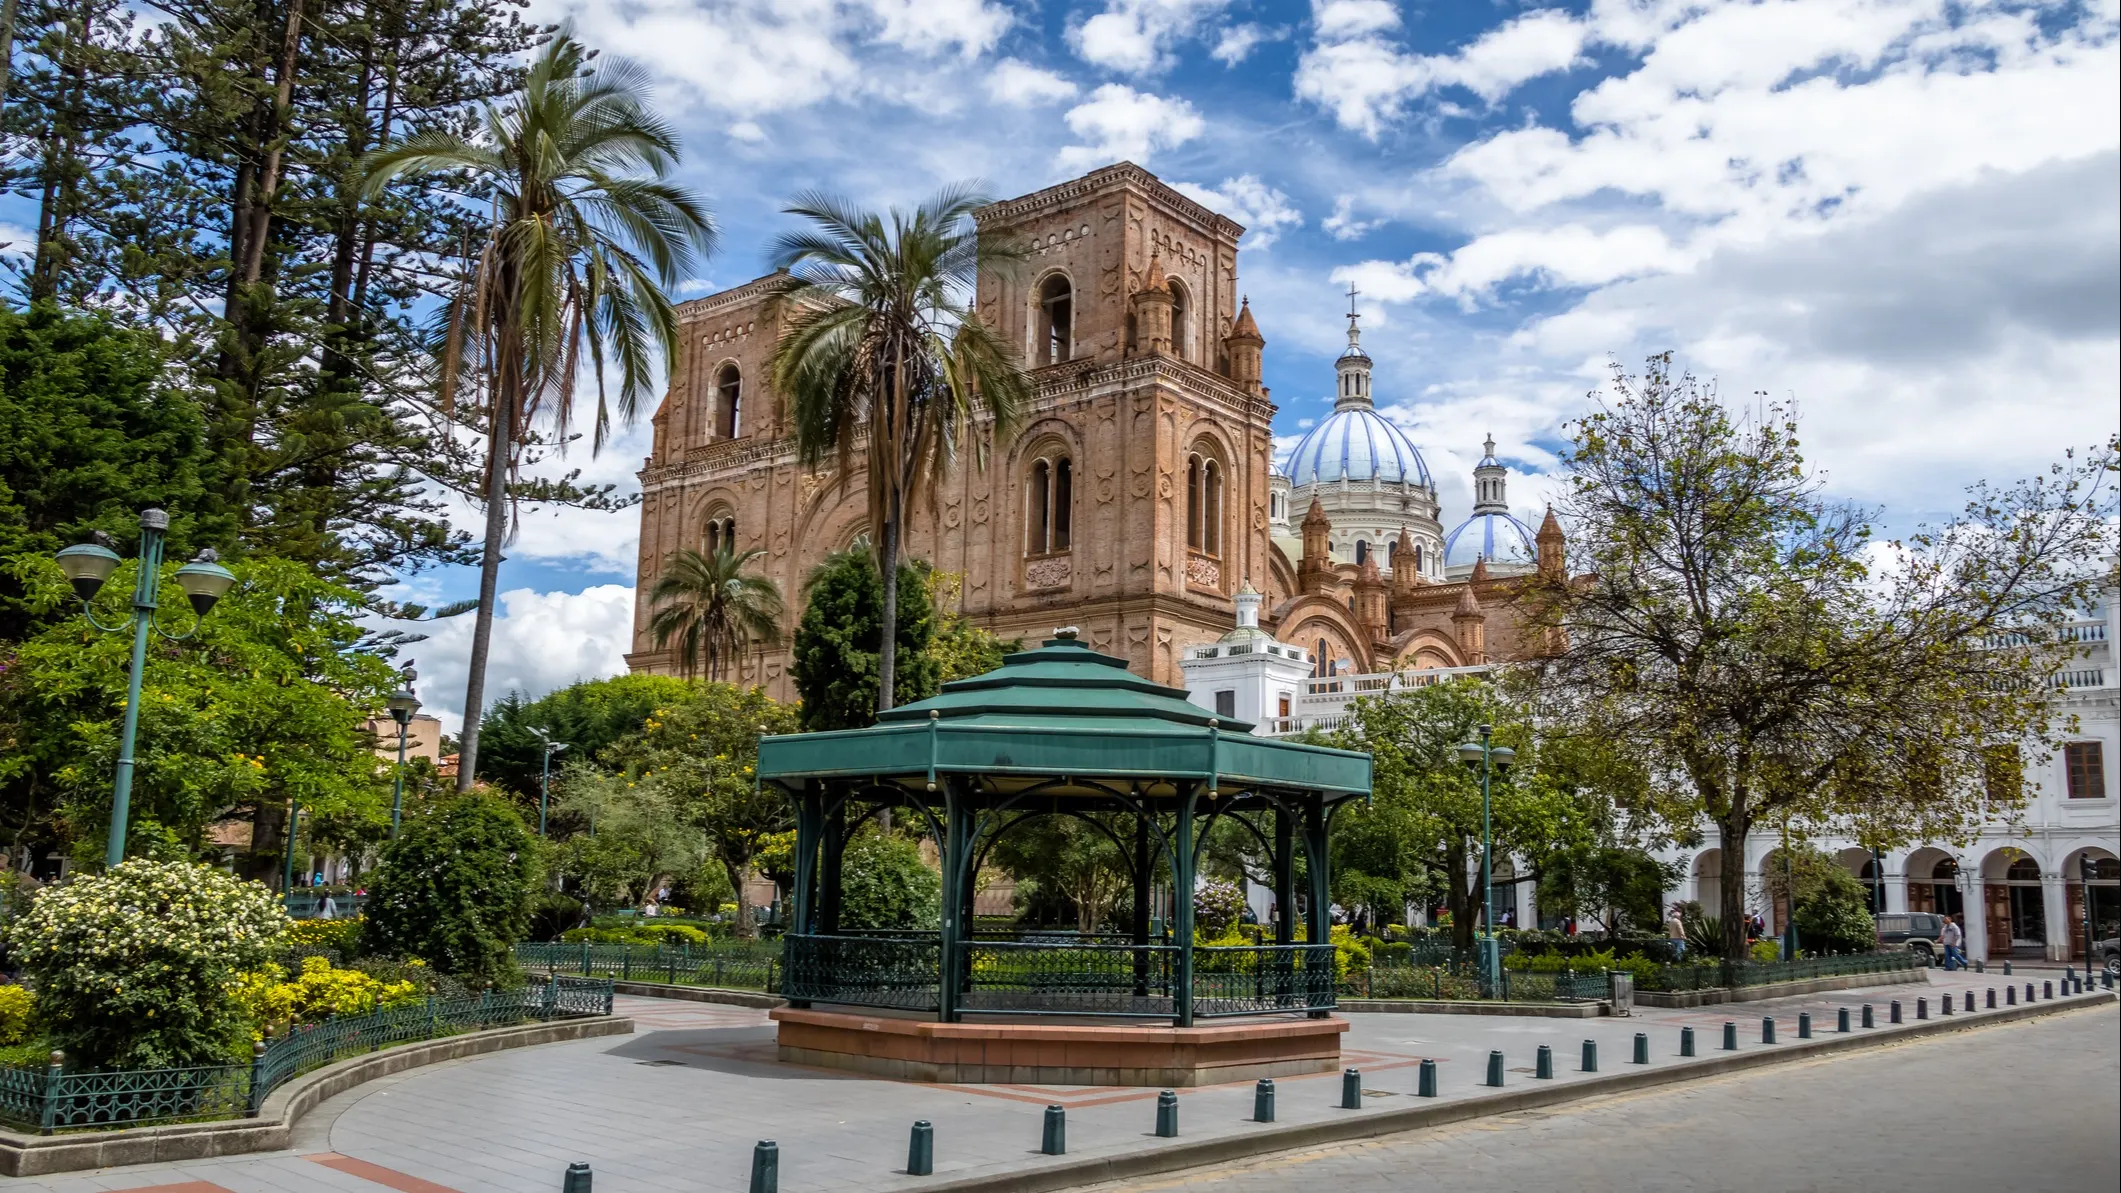 Cuenca’s cathedral with its famous blue-domes is the centerpiece of this vibrant city.